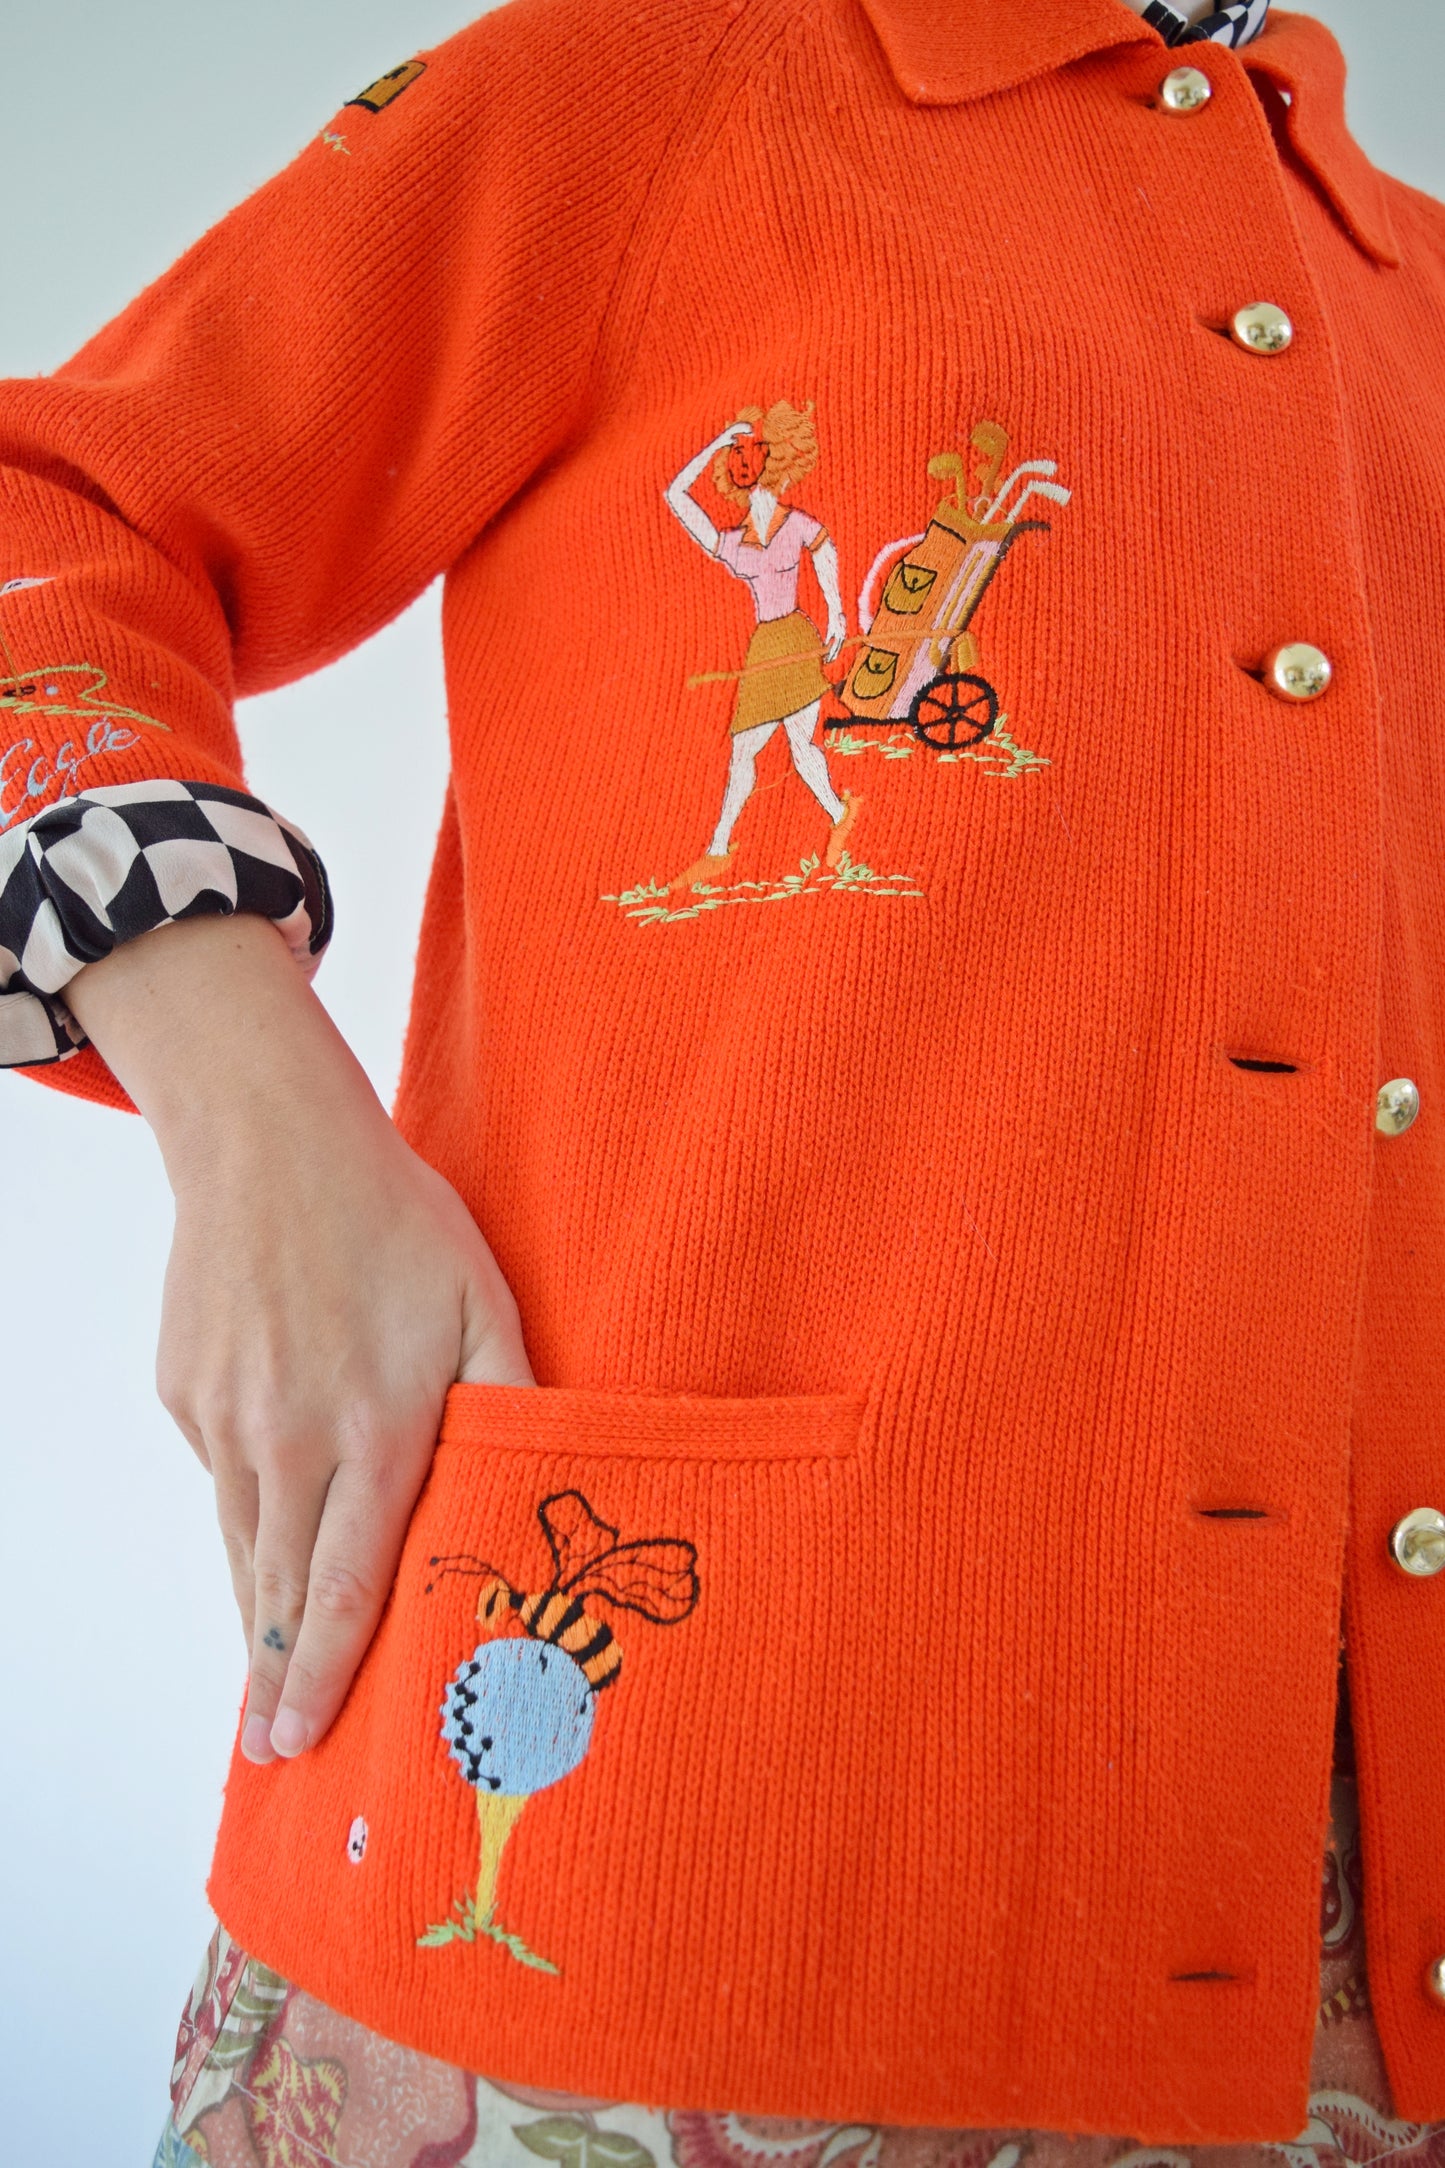 60S GOLF LADY EMBROIDERED CARDIGAN - M